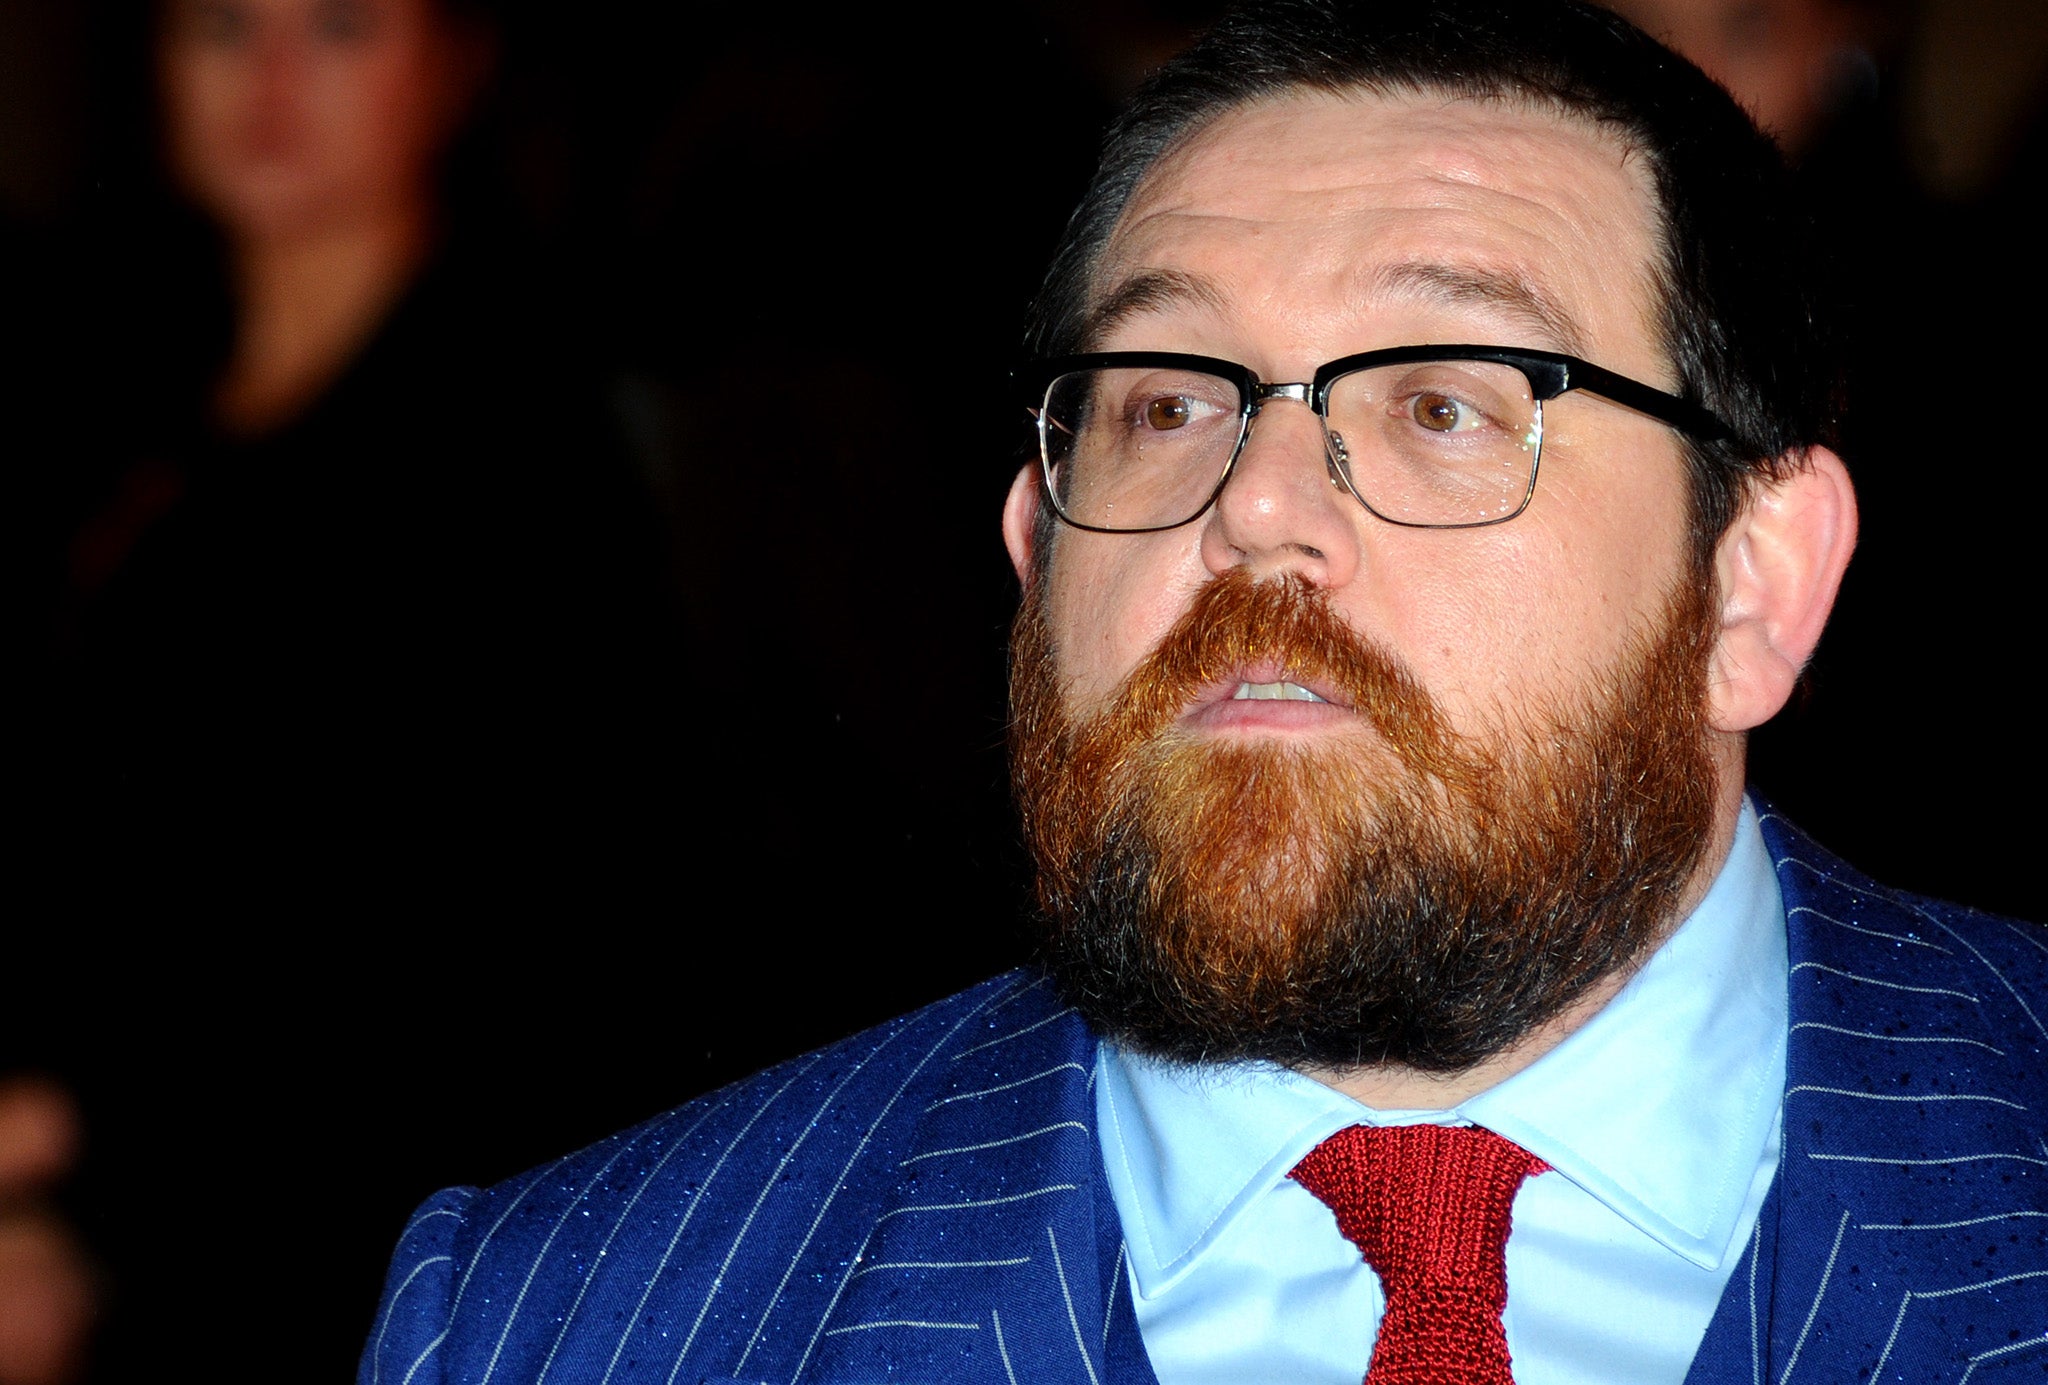 Nick Frost will star in the Doctor Who 2014 Christmas special